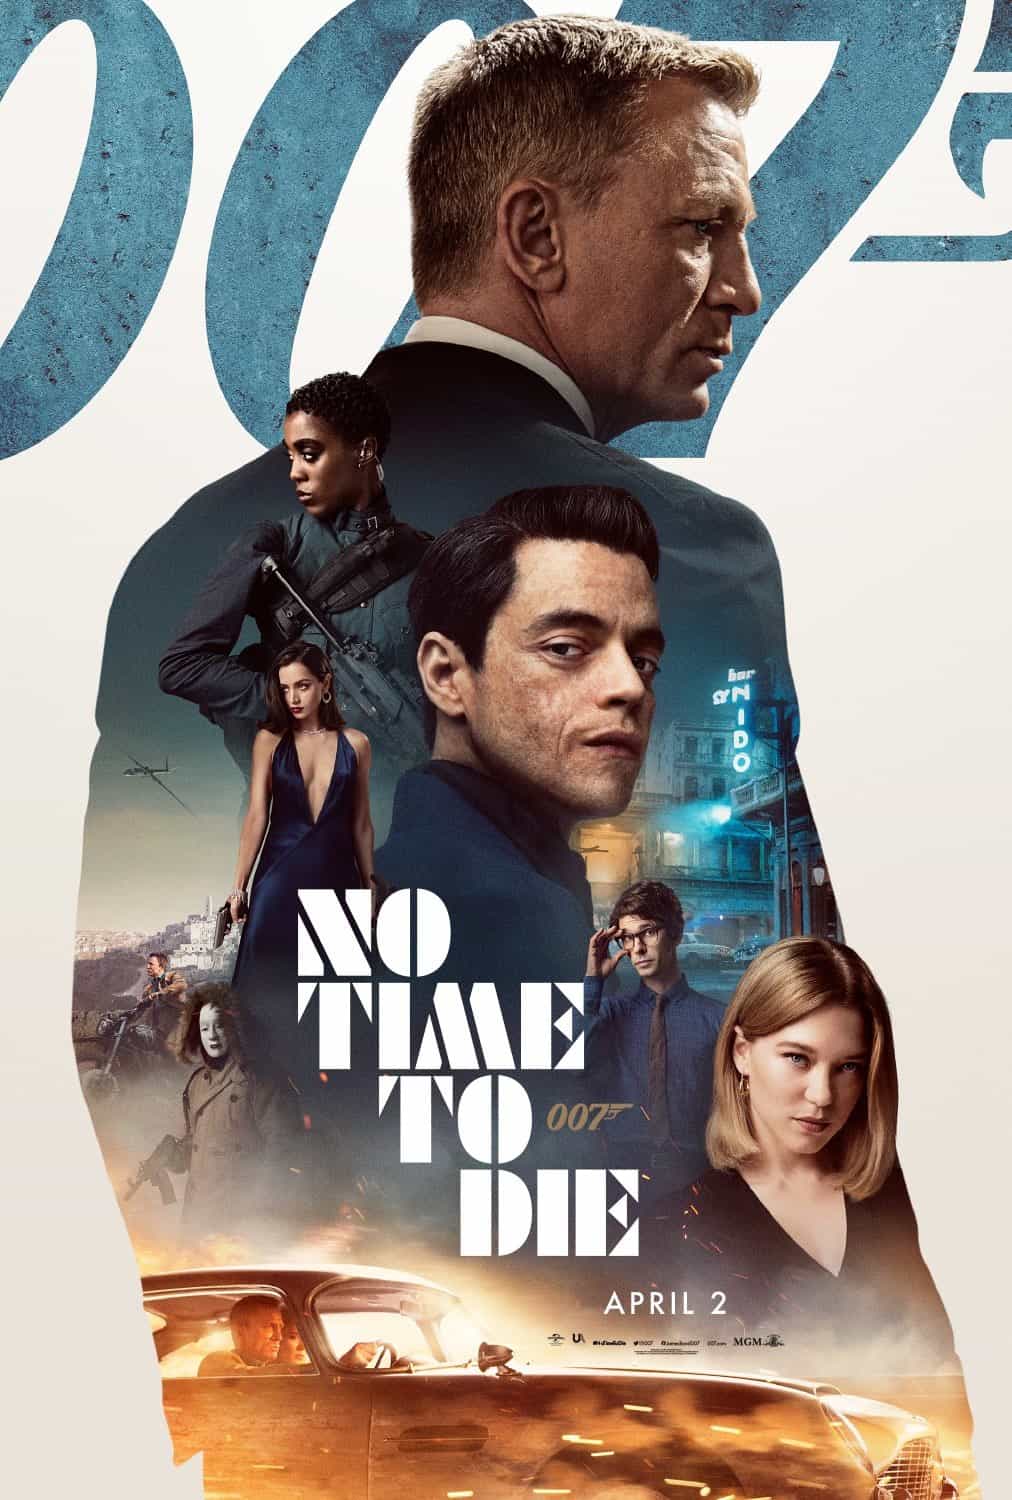 James Bond is back in action for the first full length trailer for No Time To Die